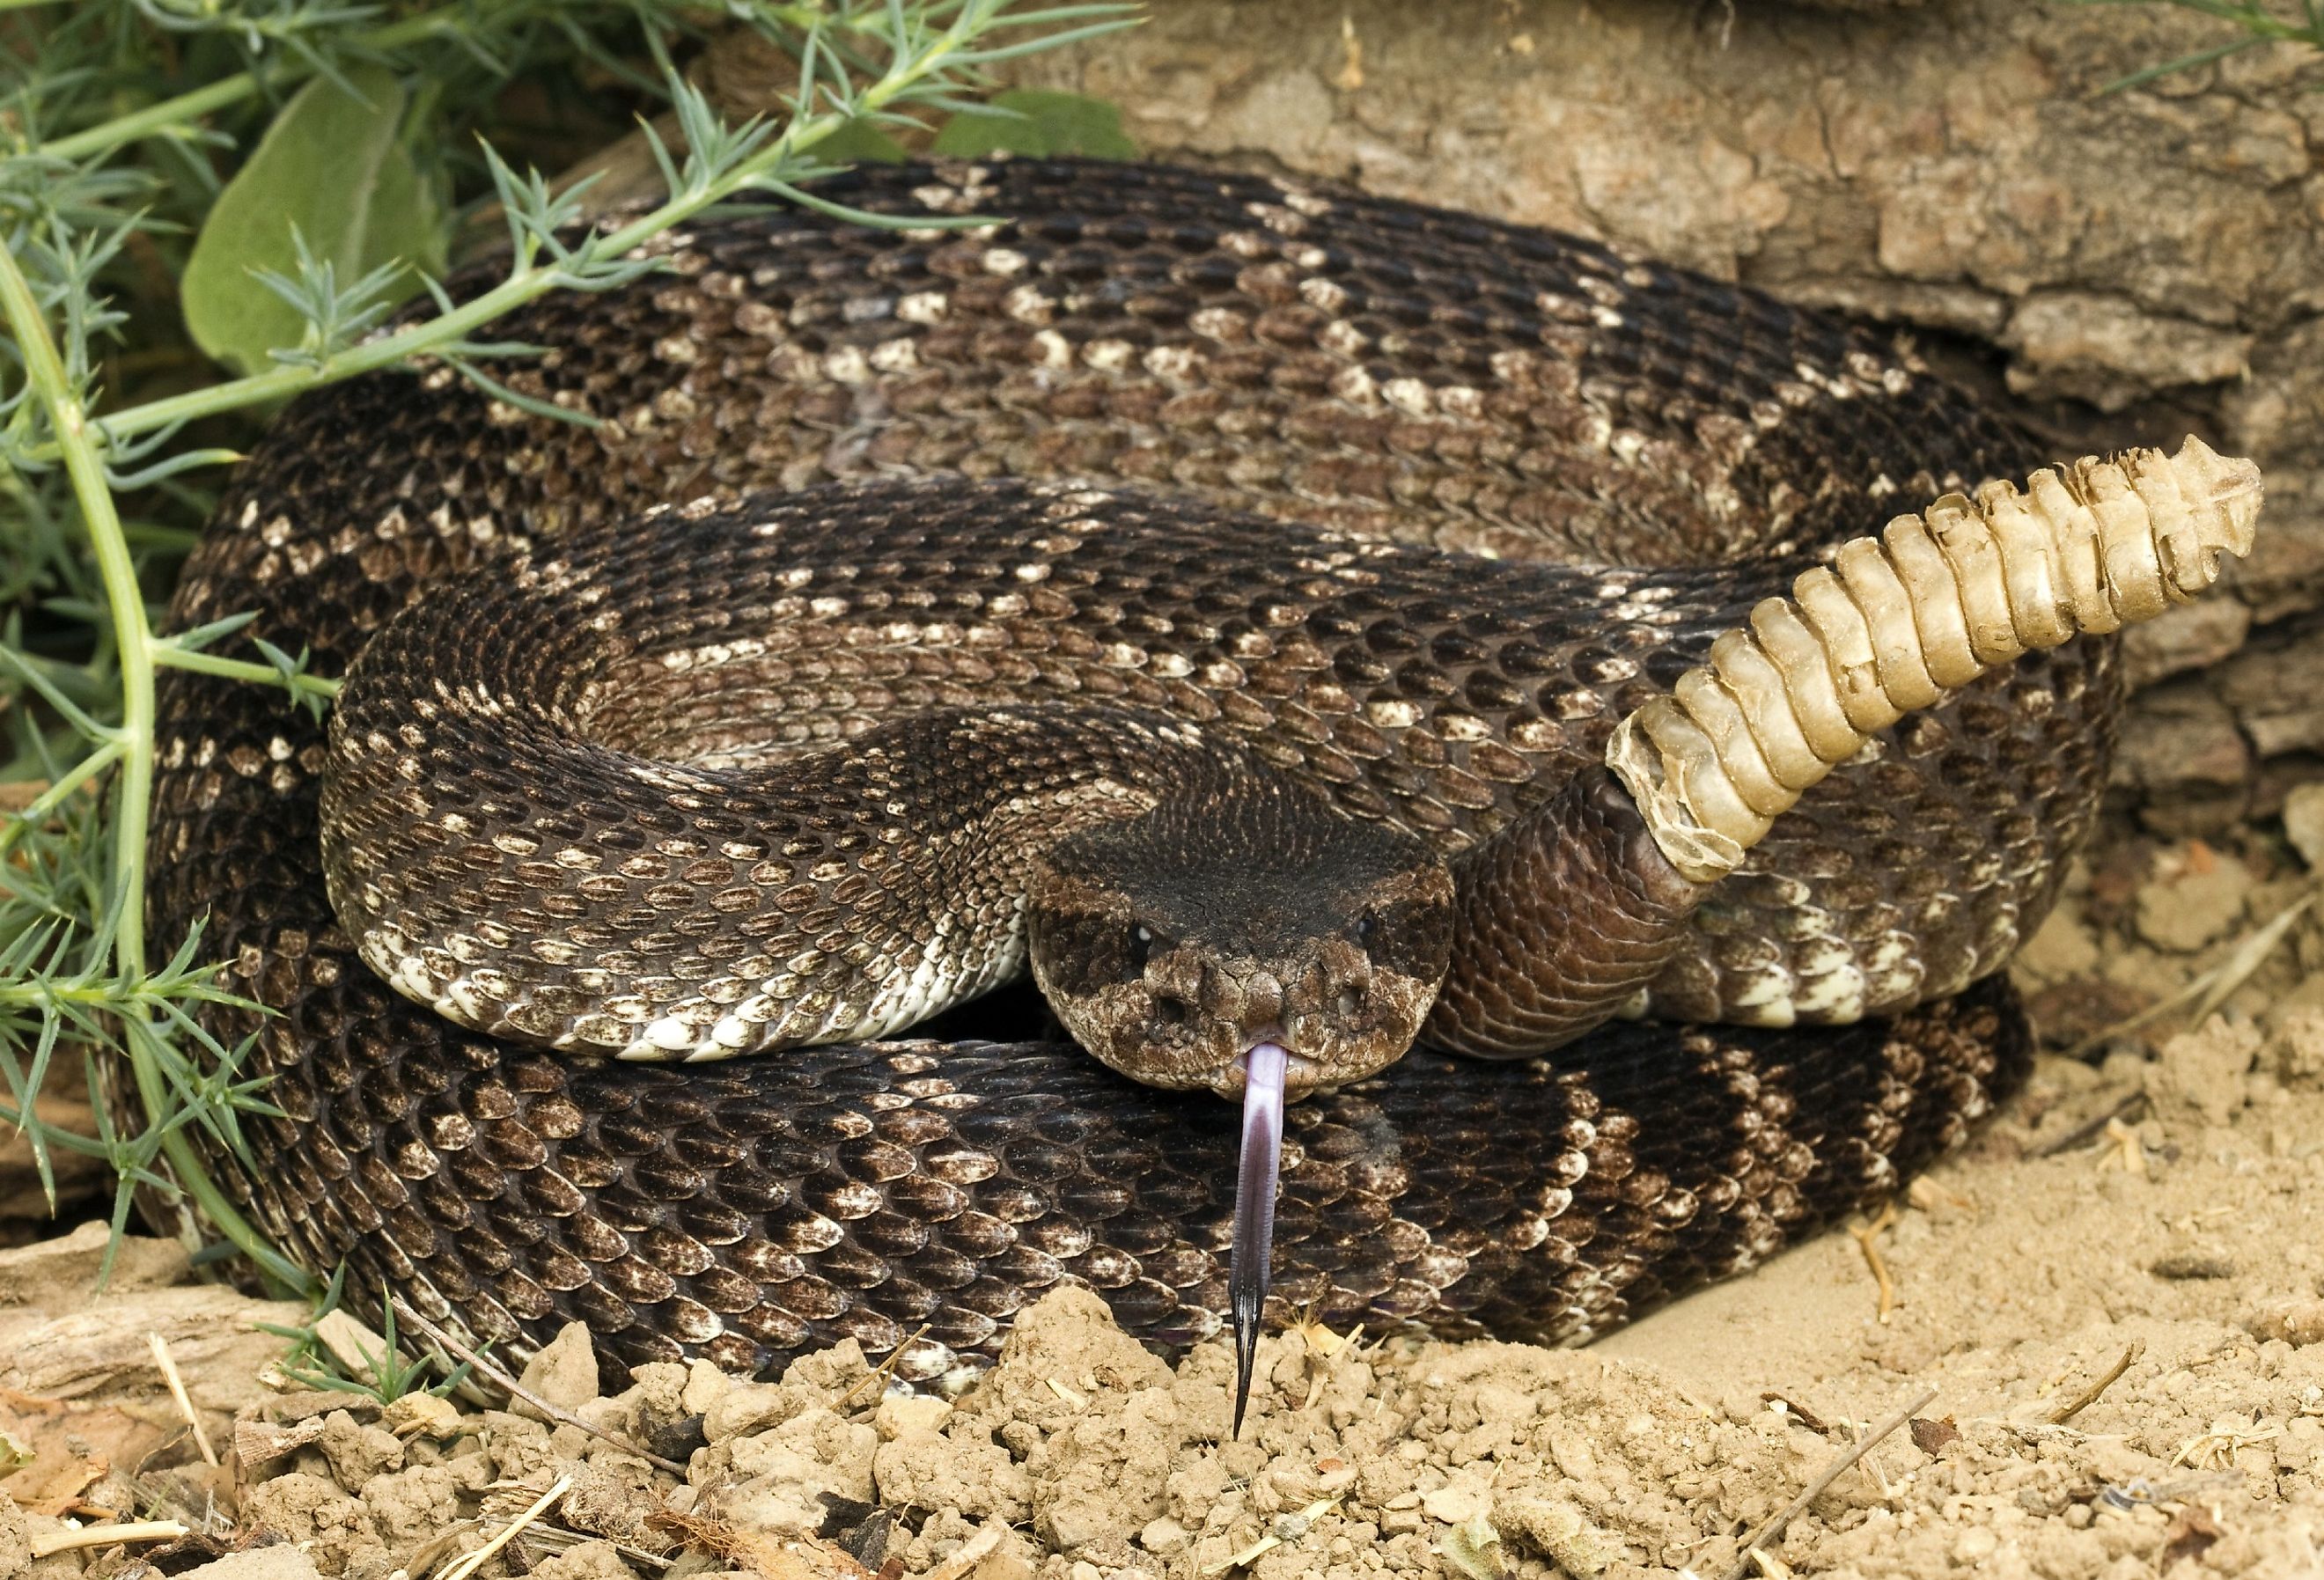 Southern Pacific Rattlesnake coiled up with its tail in the air.